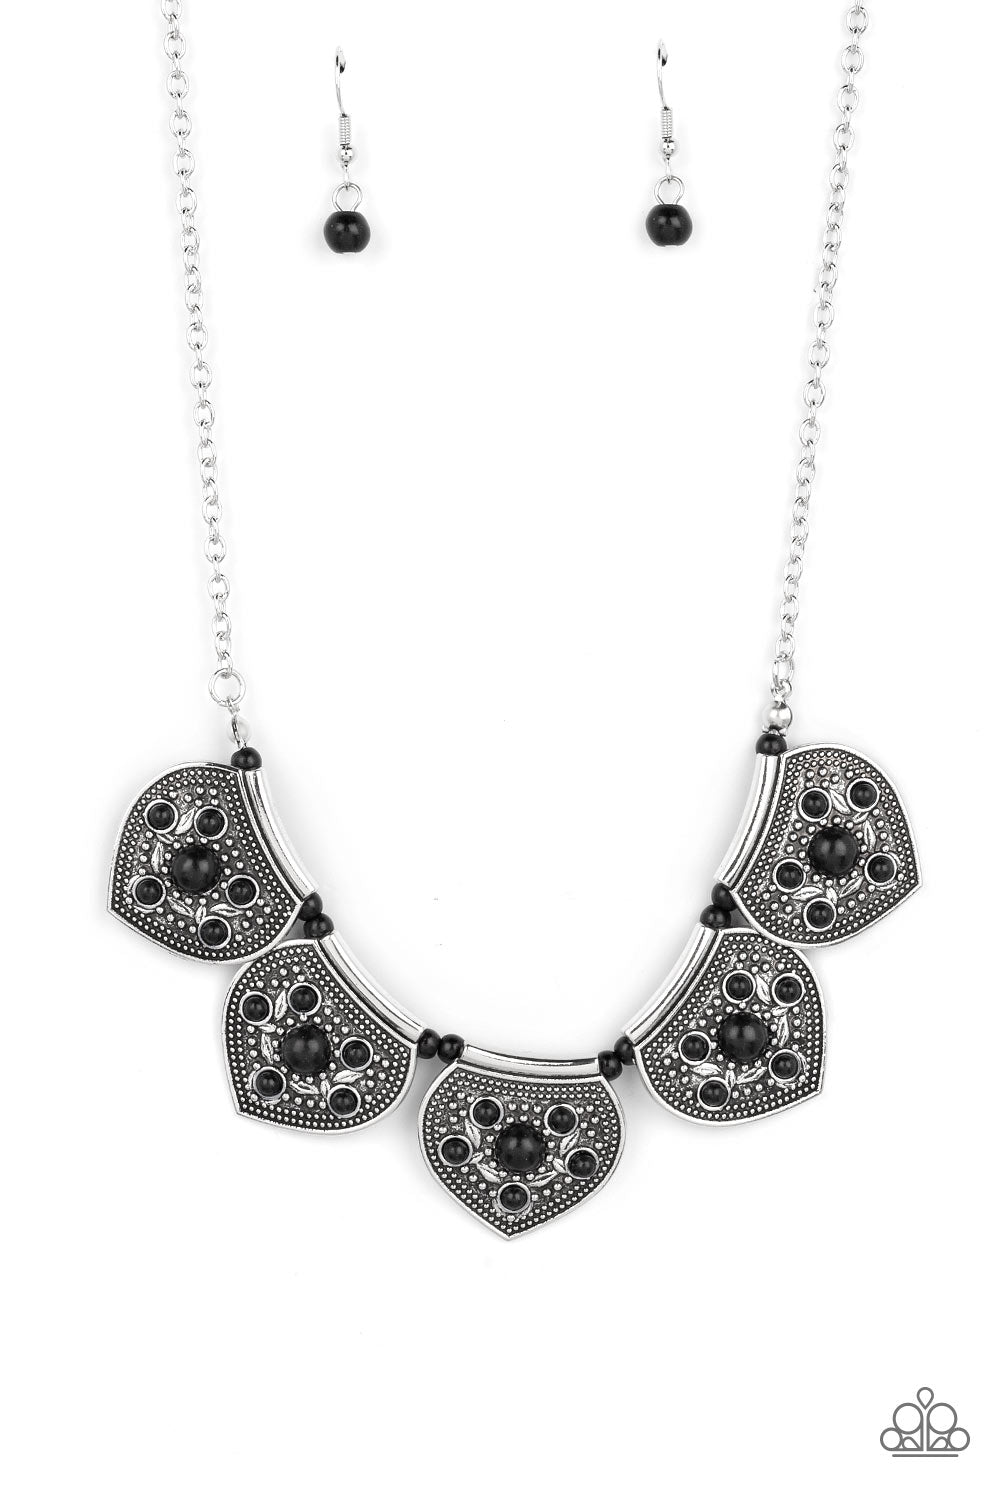 Badlands Basin Paparazzi Accessories Necklace with Earrings Black